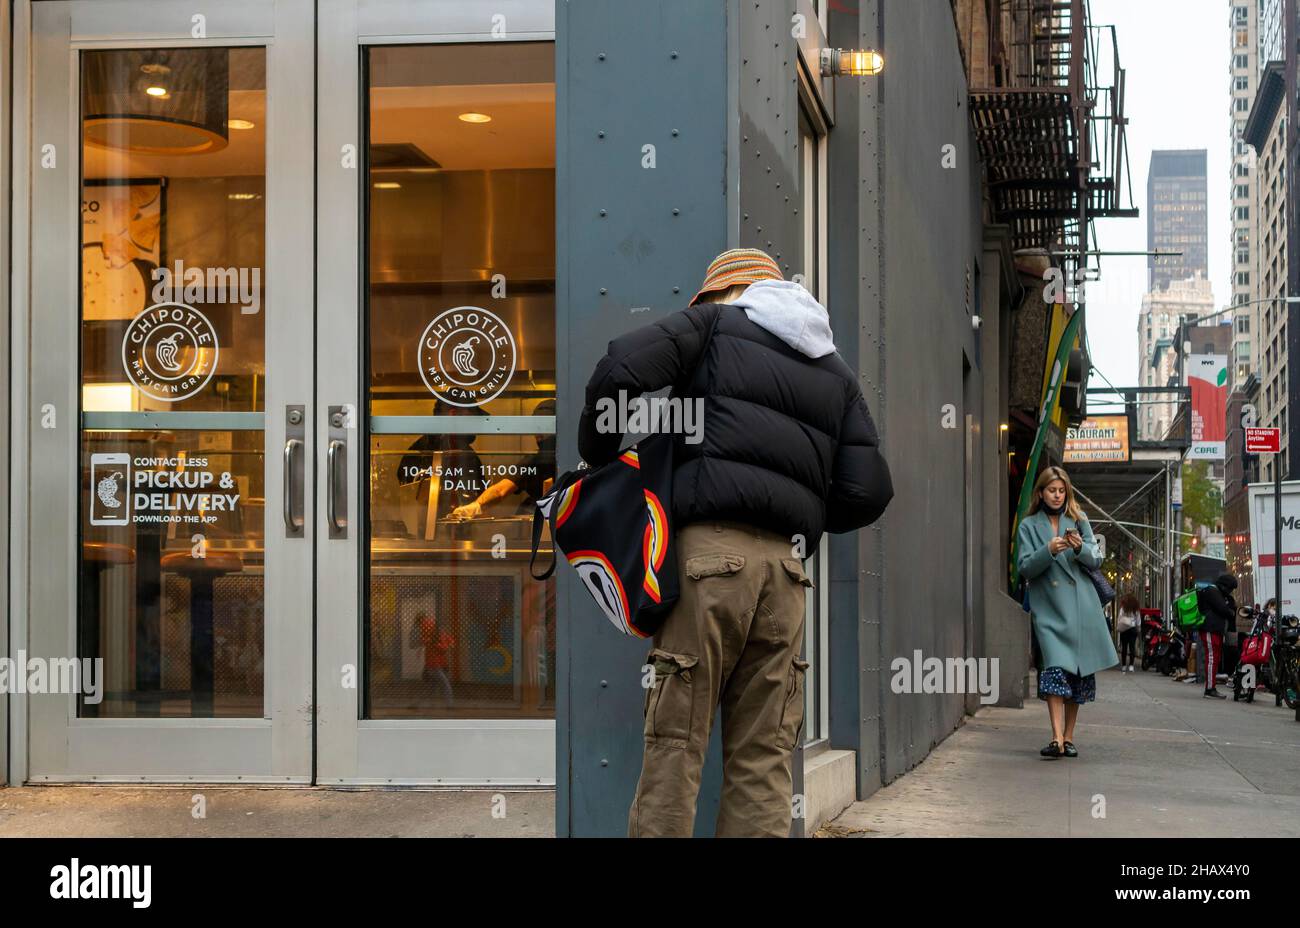 A Chipotle Mexican Grill restaurant in the Chelsea neighborhood of New York on Monday, December 6, 2021. (© Richard B. Levine) Stock Photo